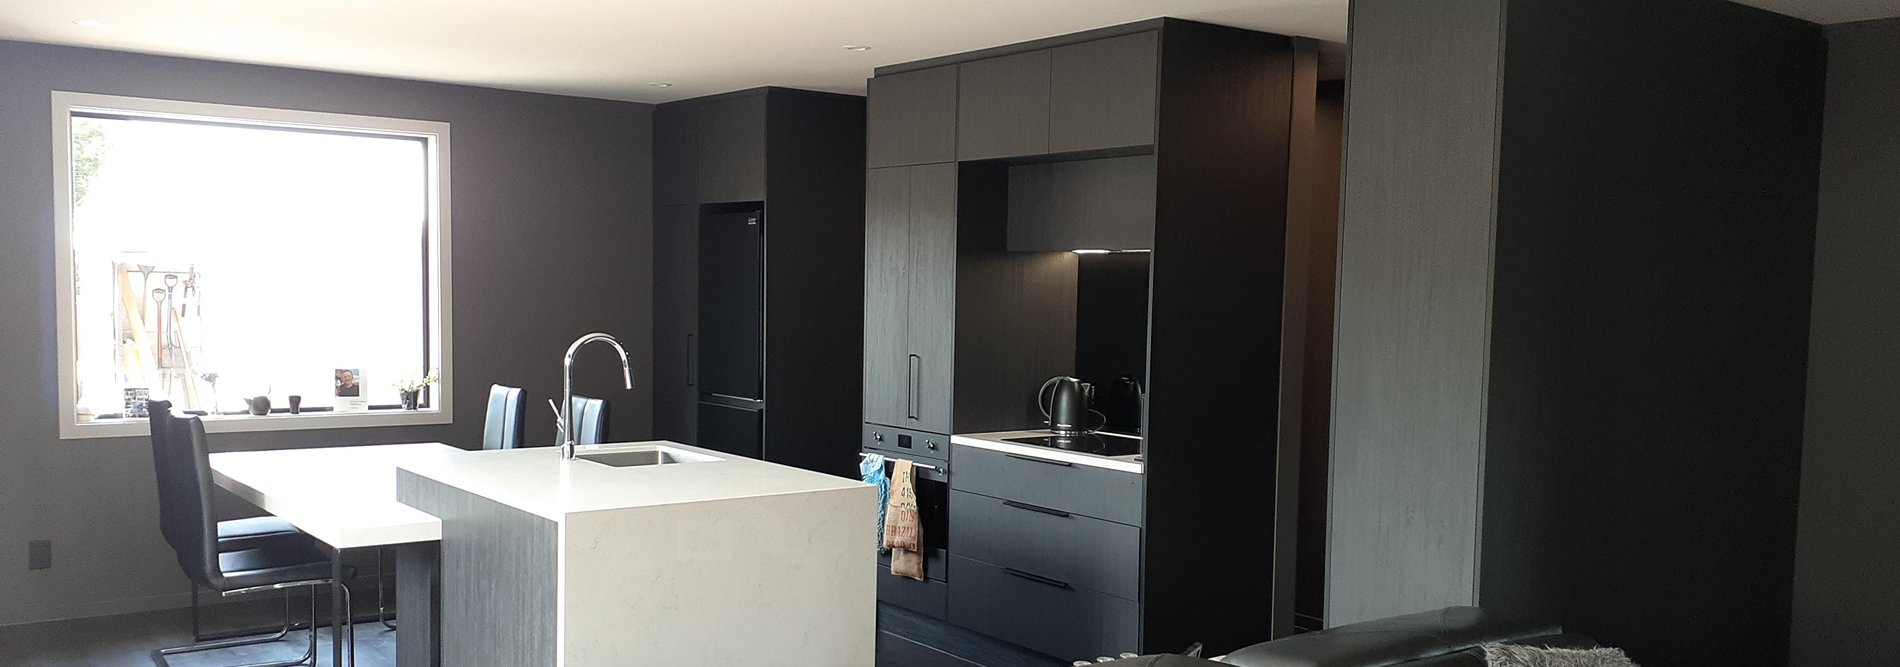 Kitchen with wooden black cabinet and white counter tops